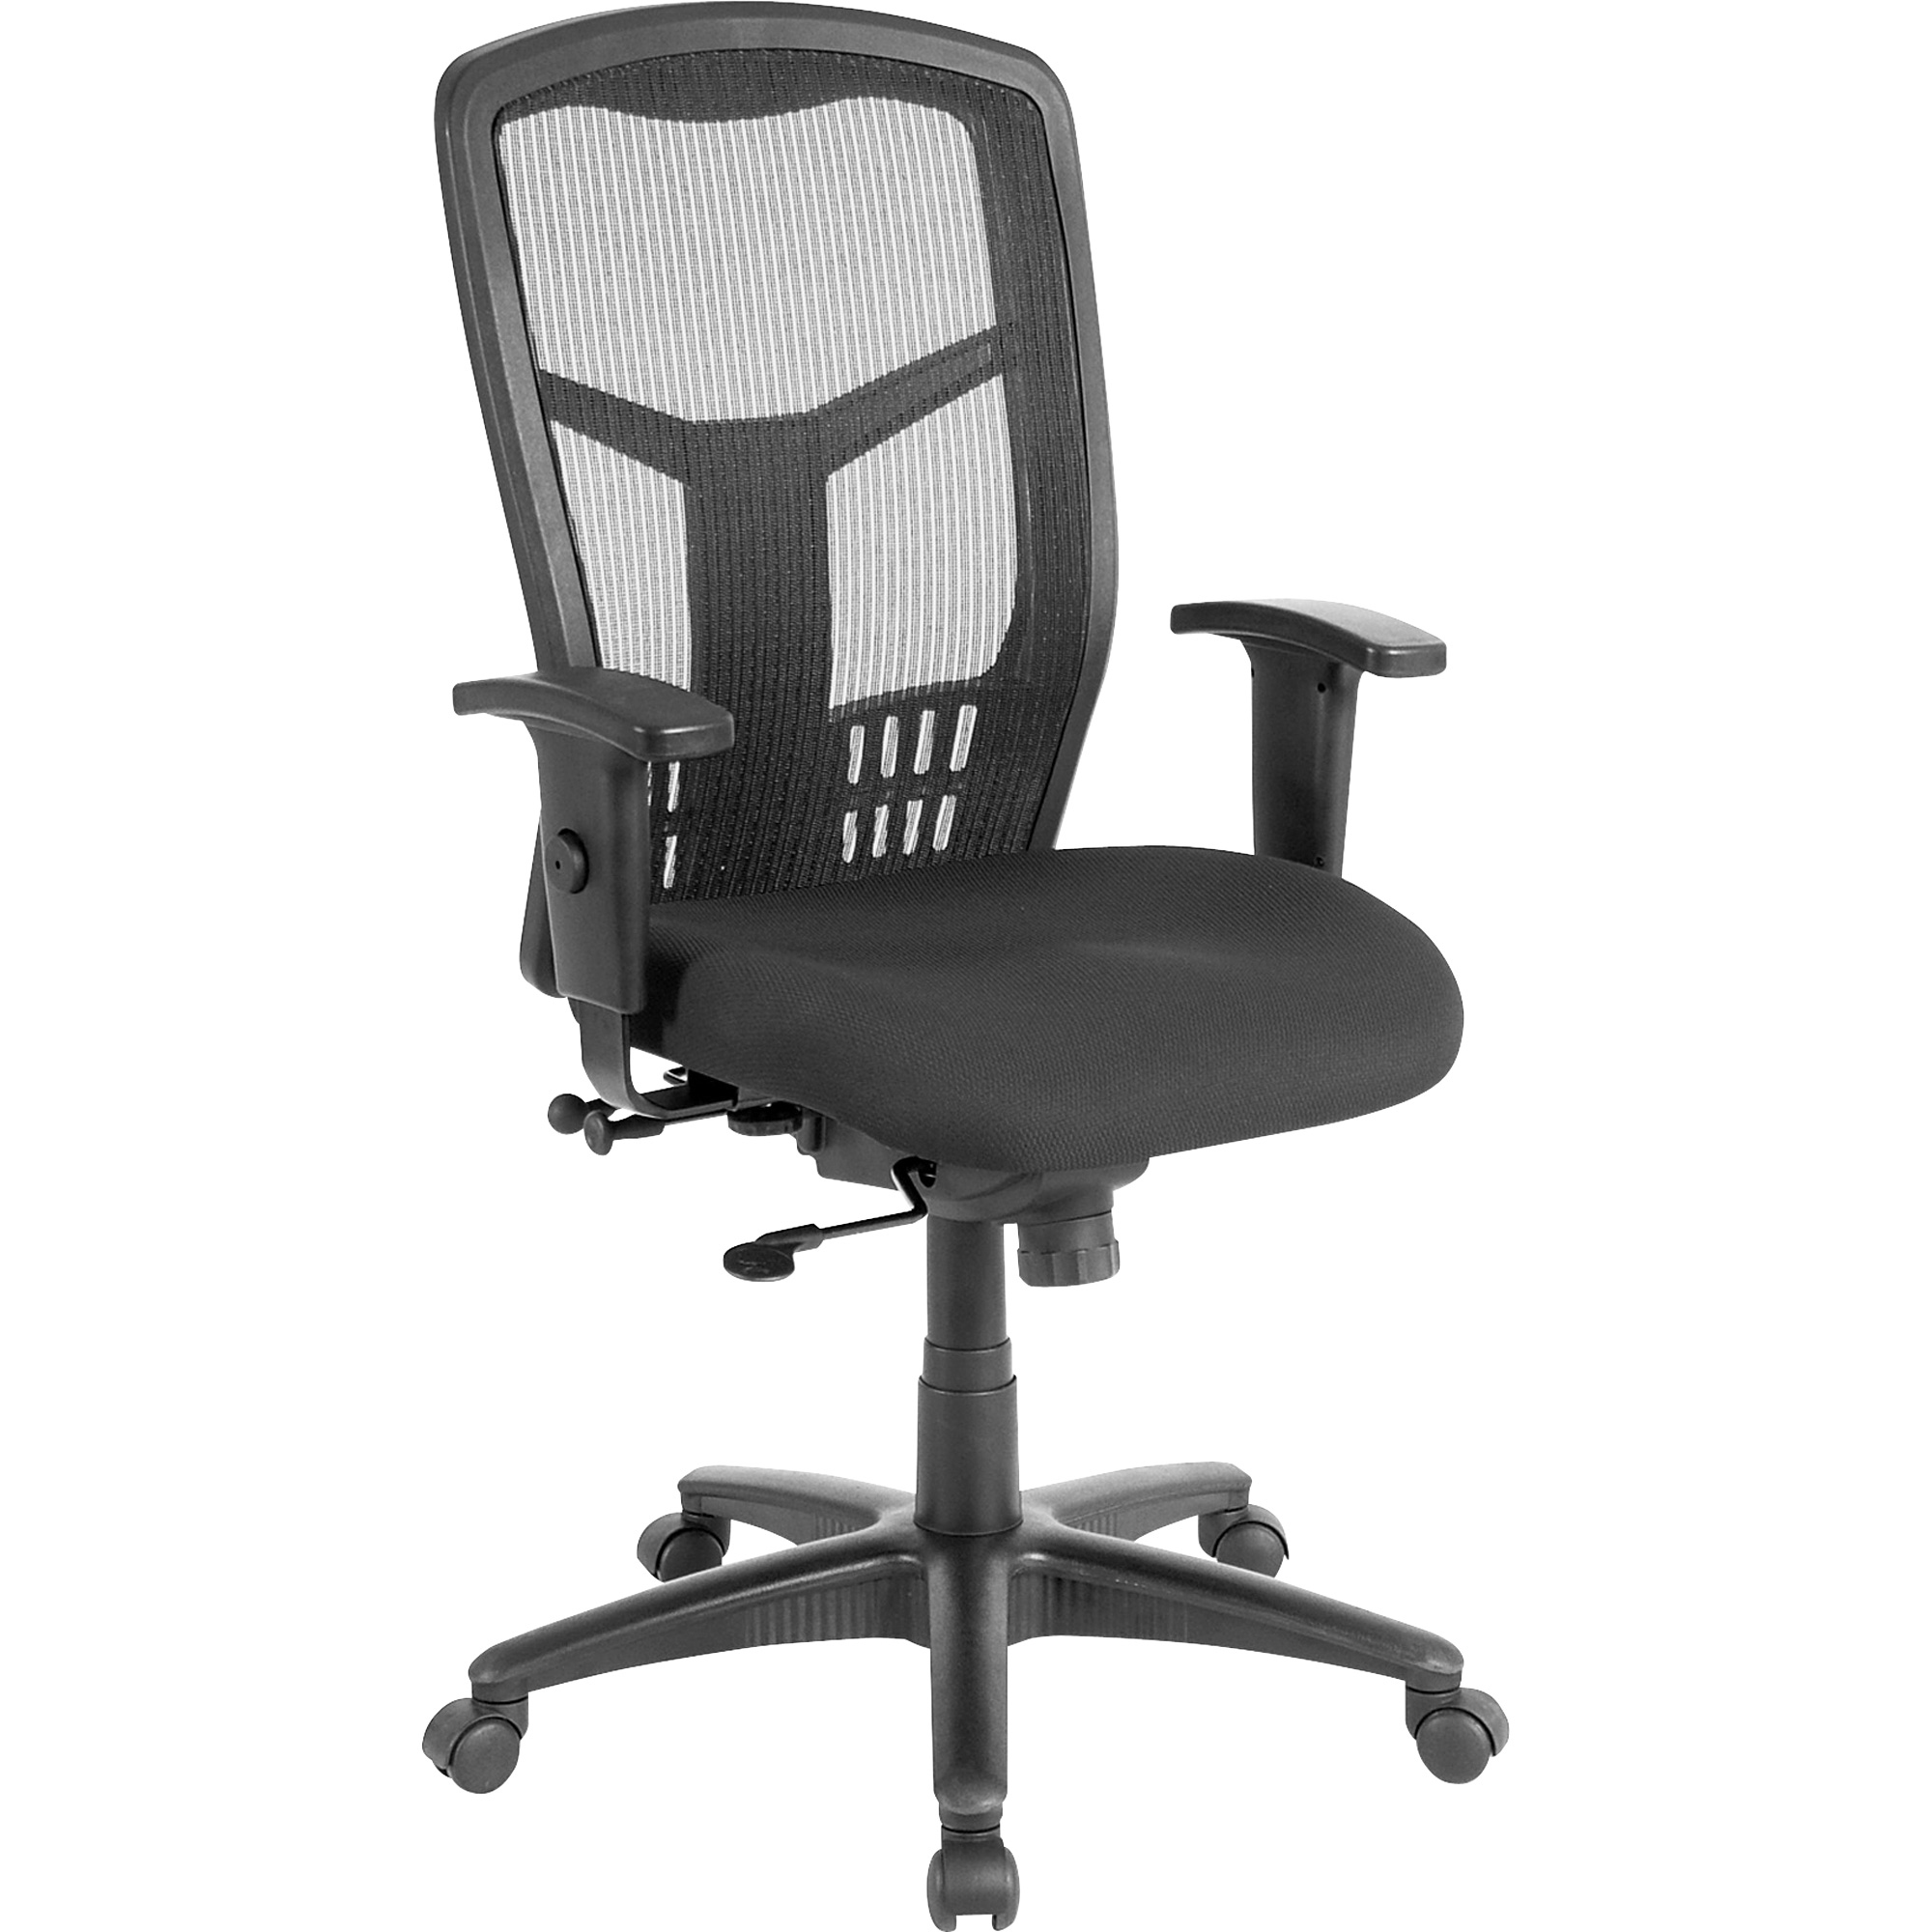 Product Llr86205 Lorell Executive High Back Swivel Chair 360 Business Products